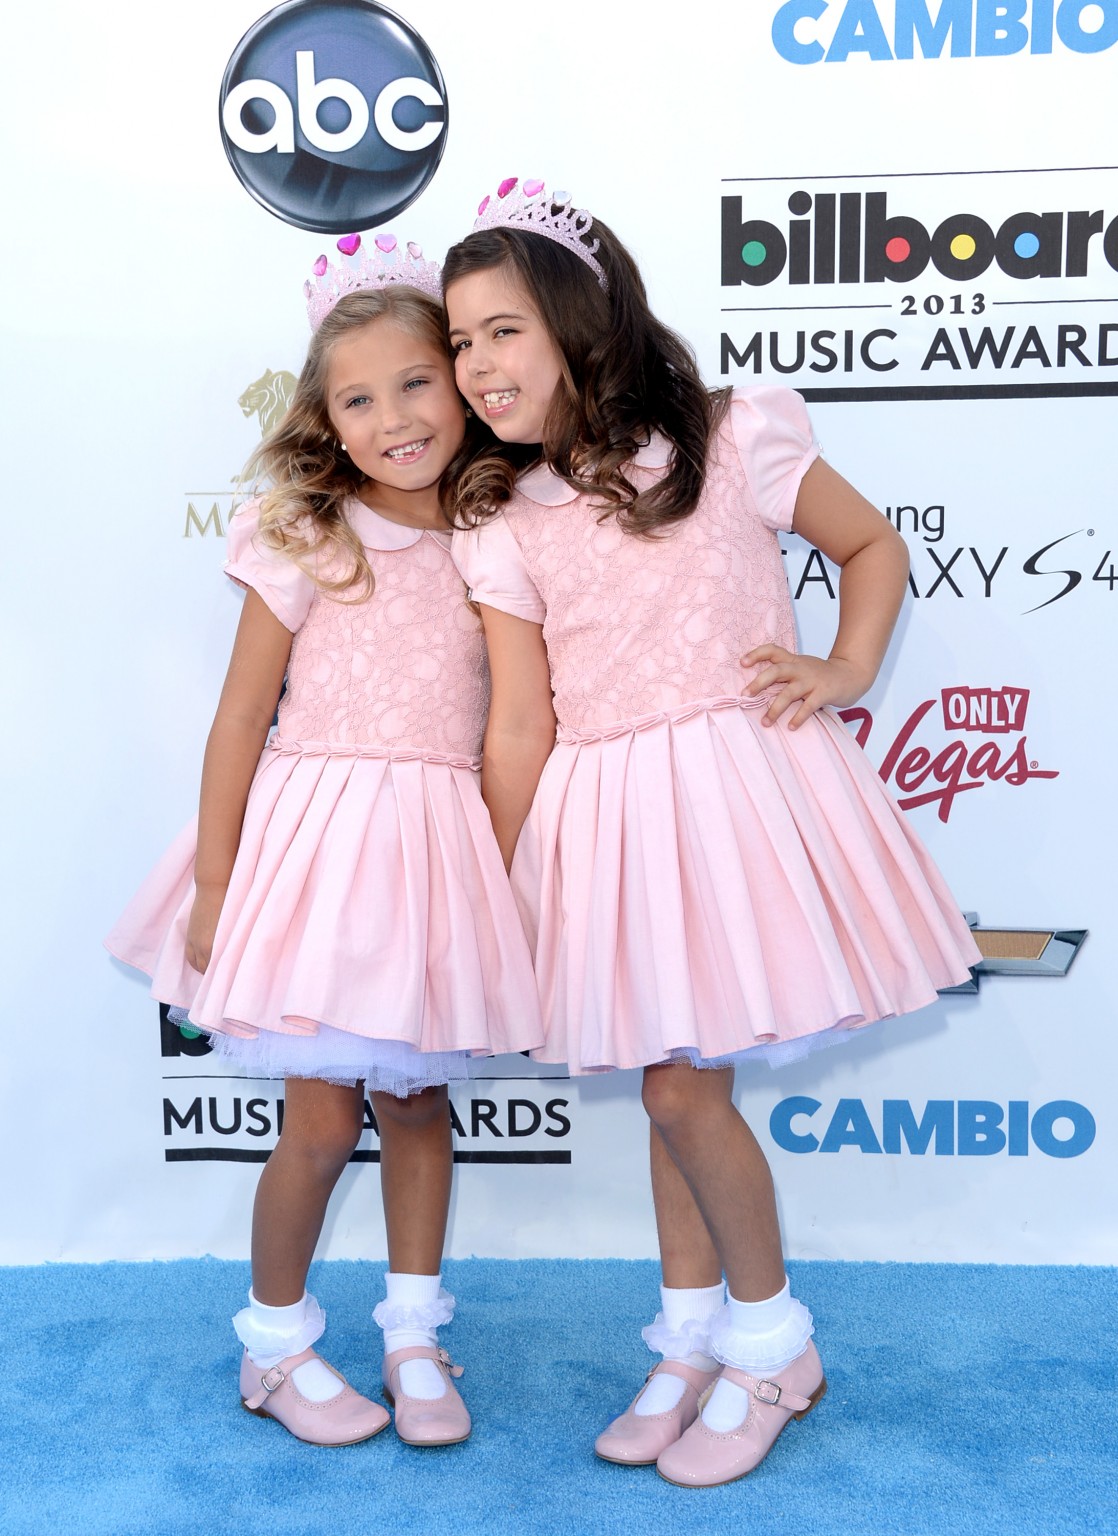 However, I believe two of my all time favorites, Sophia Grace and Rosie, st...